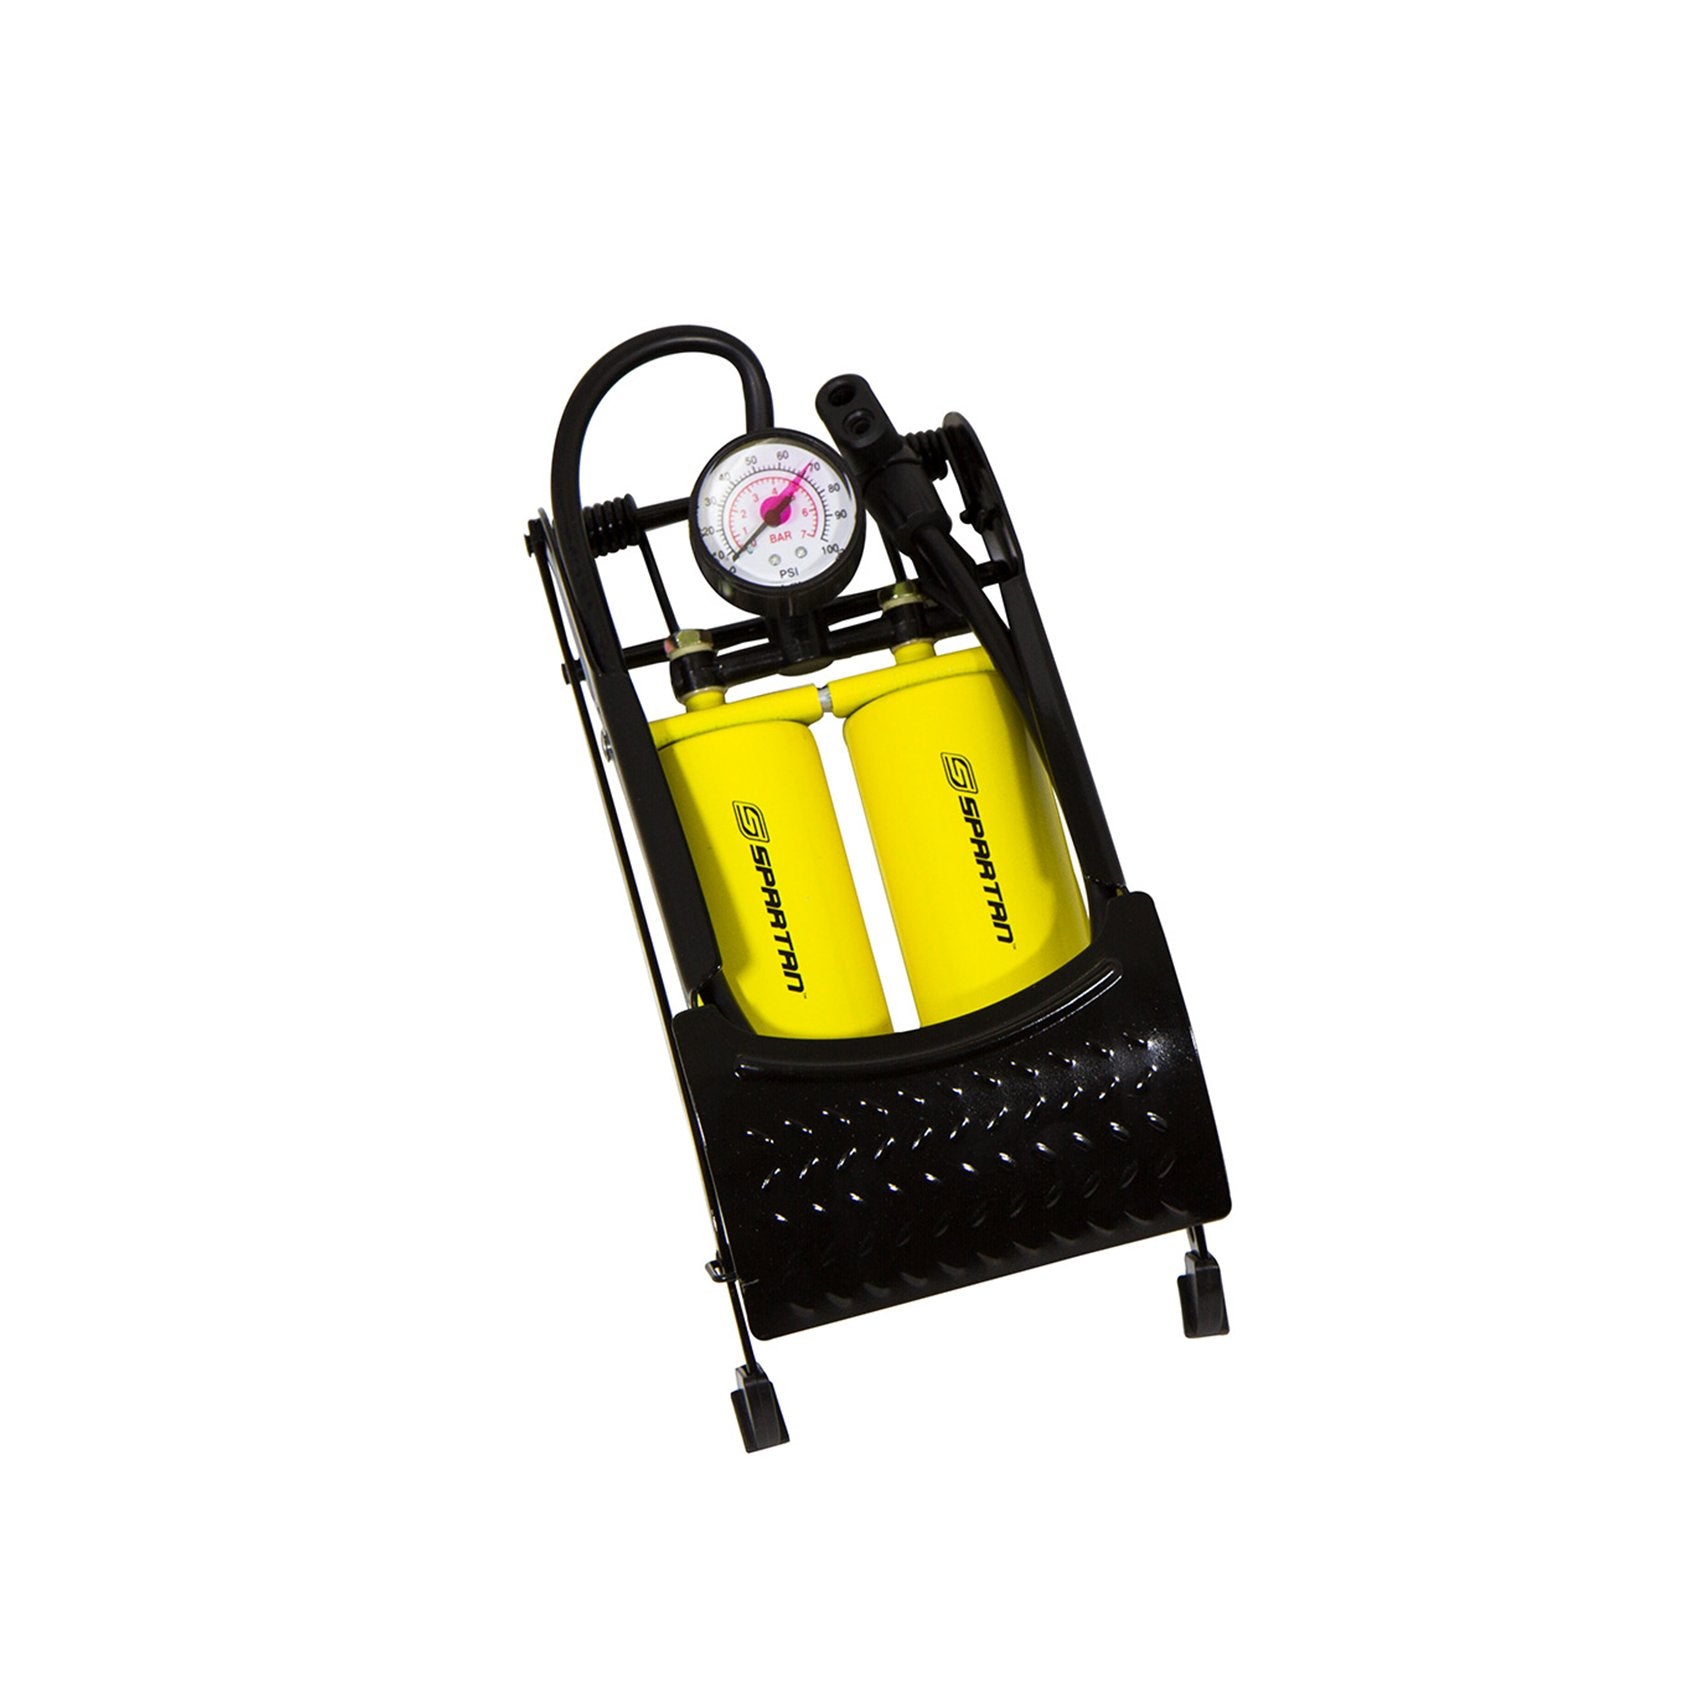 Spartan Double Cylinder Foot Pump - 200PSI